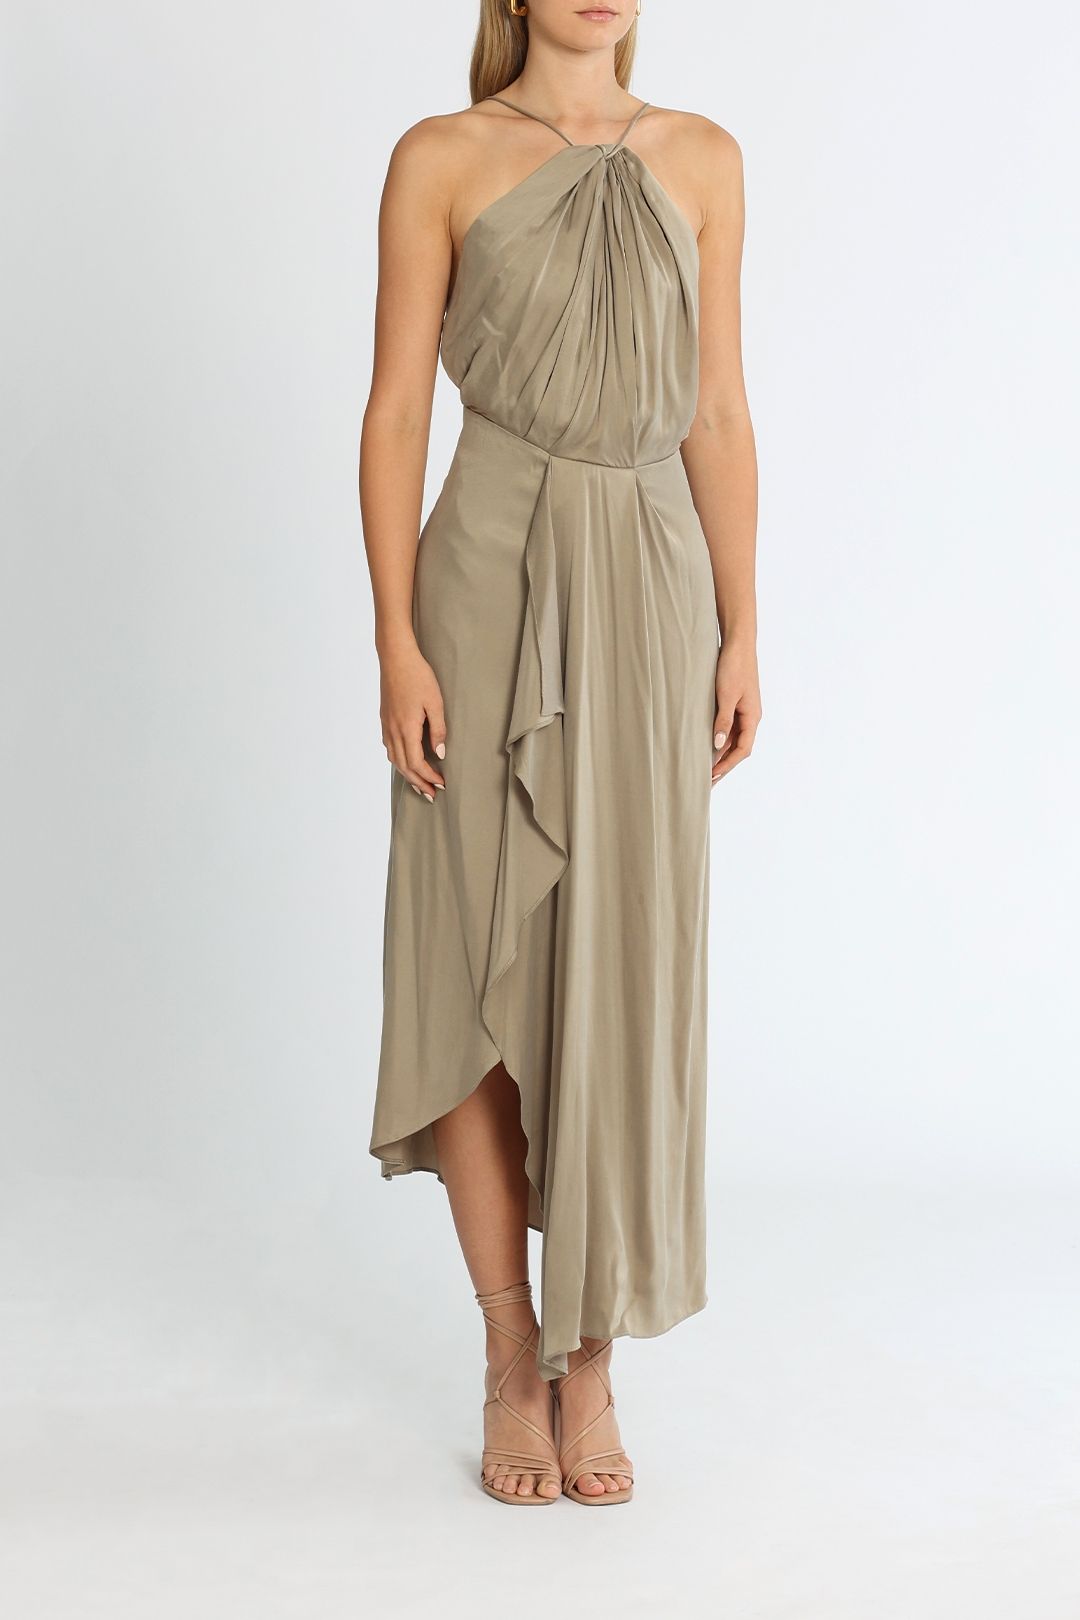 Significant Other Athena Dress Taupe Midi